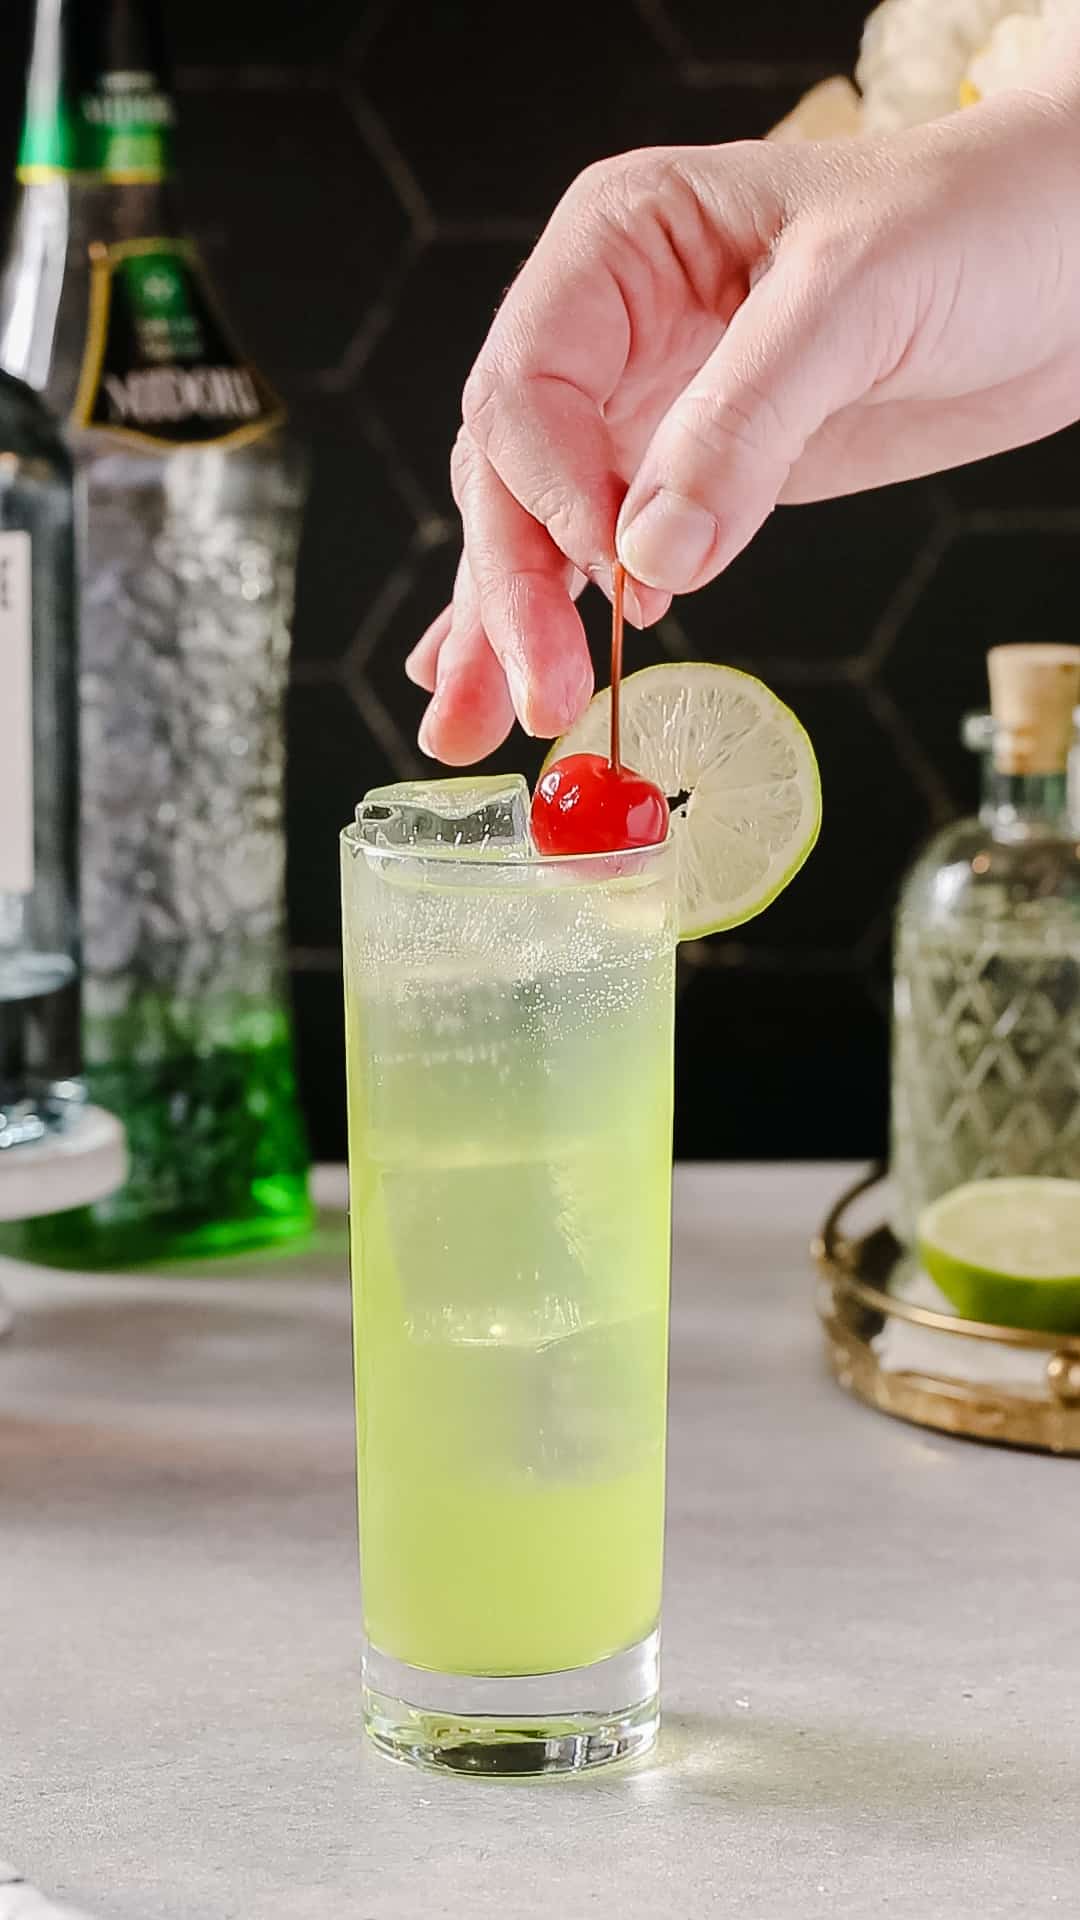 Hand adding a maraschino cherry to the top of a cocktail glass filled with green liquid and ice cubes.